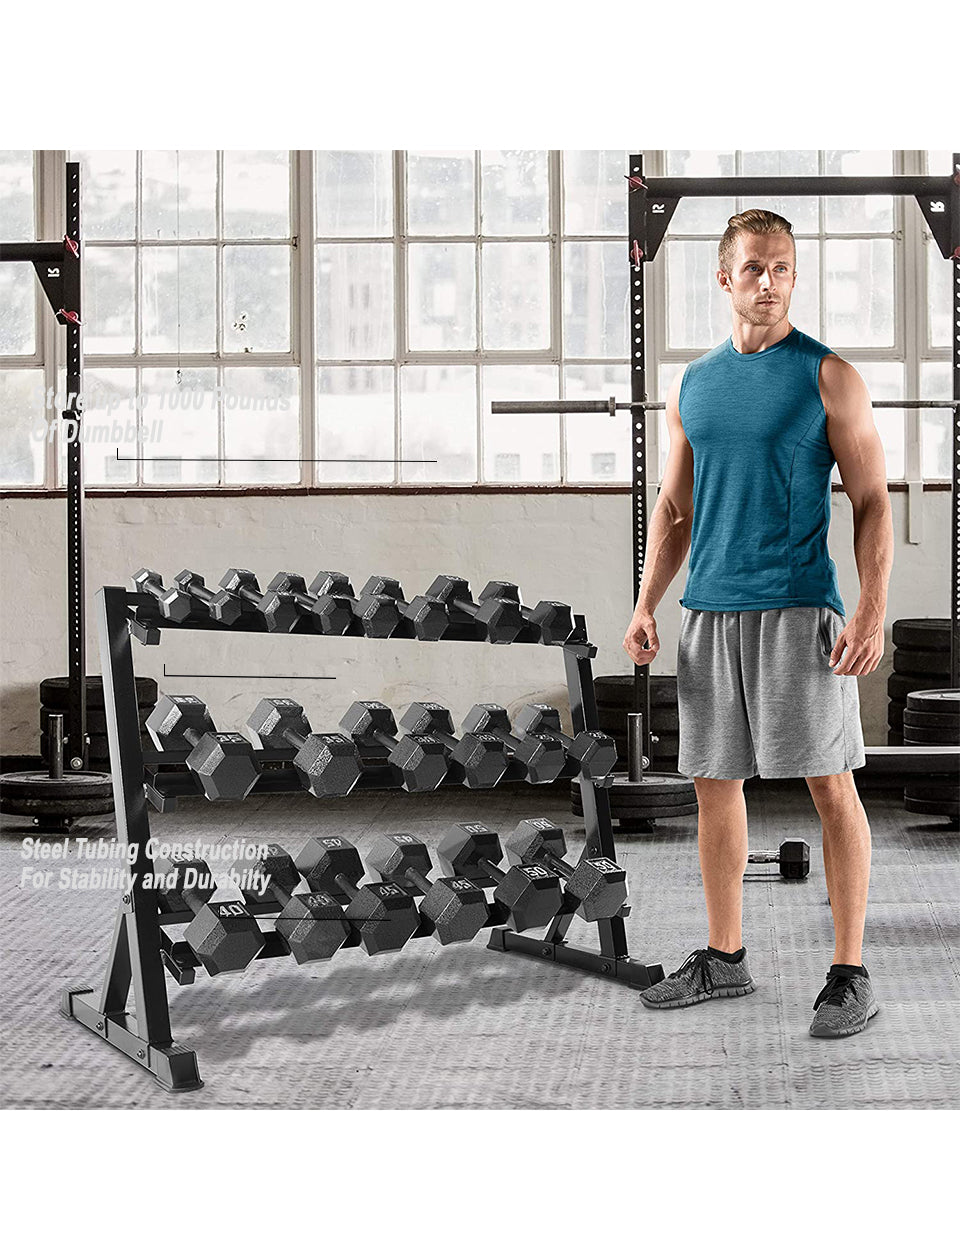 10 Pair Dumbbell Rack-quality steel construction guarantees durability and stability.